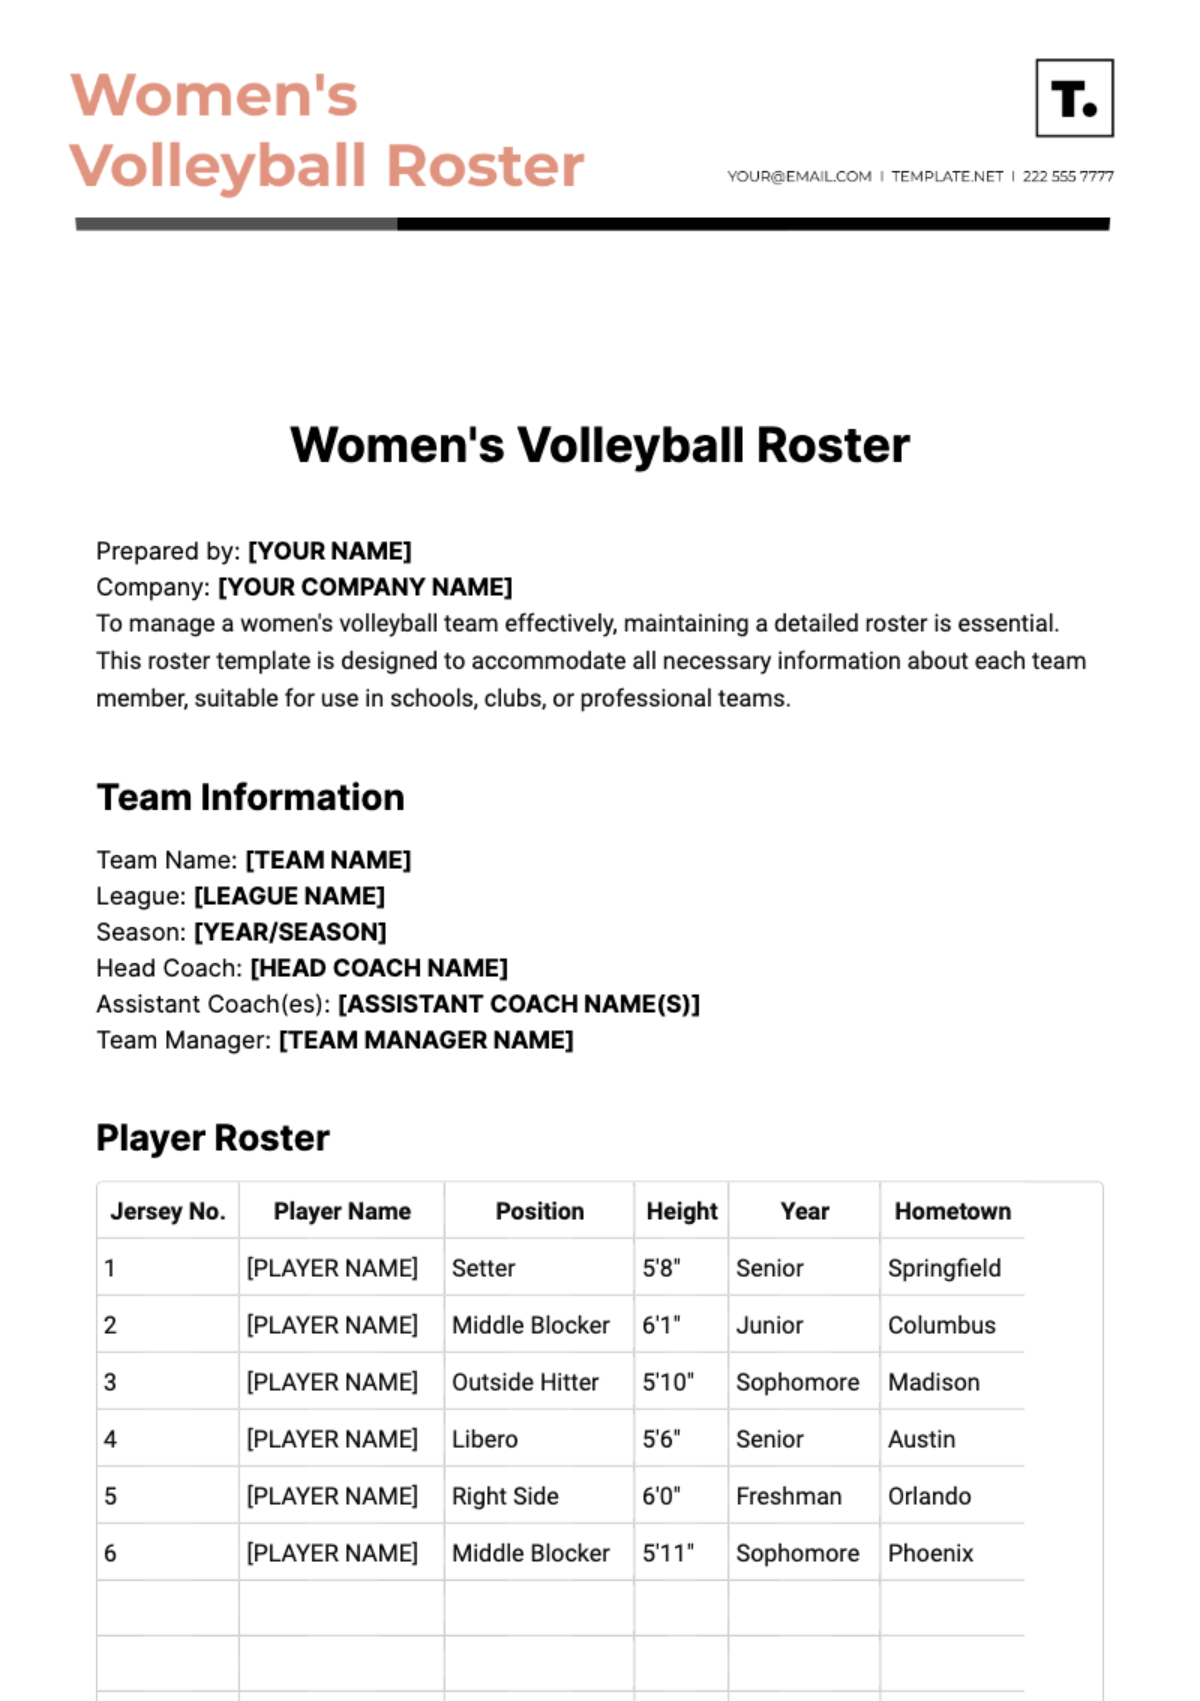 Free Women's Volleyball Roster Template